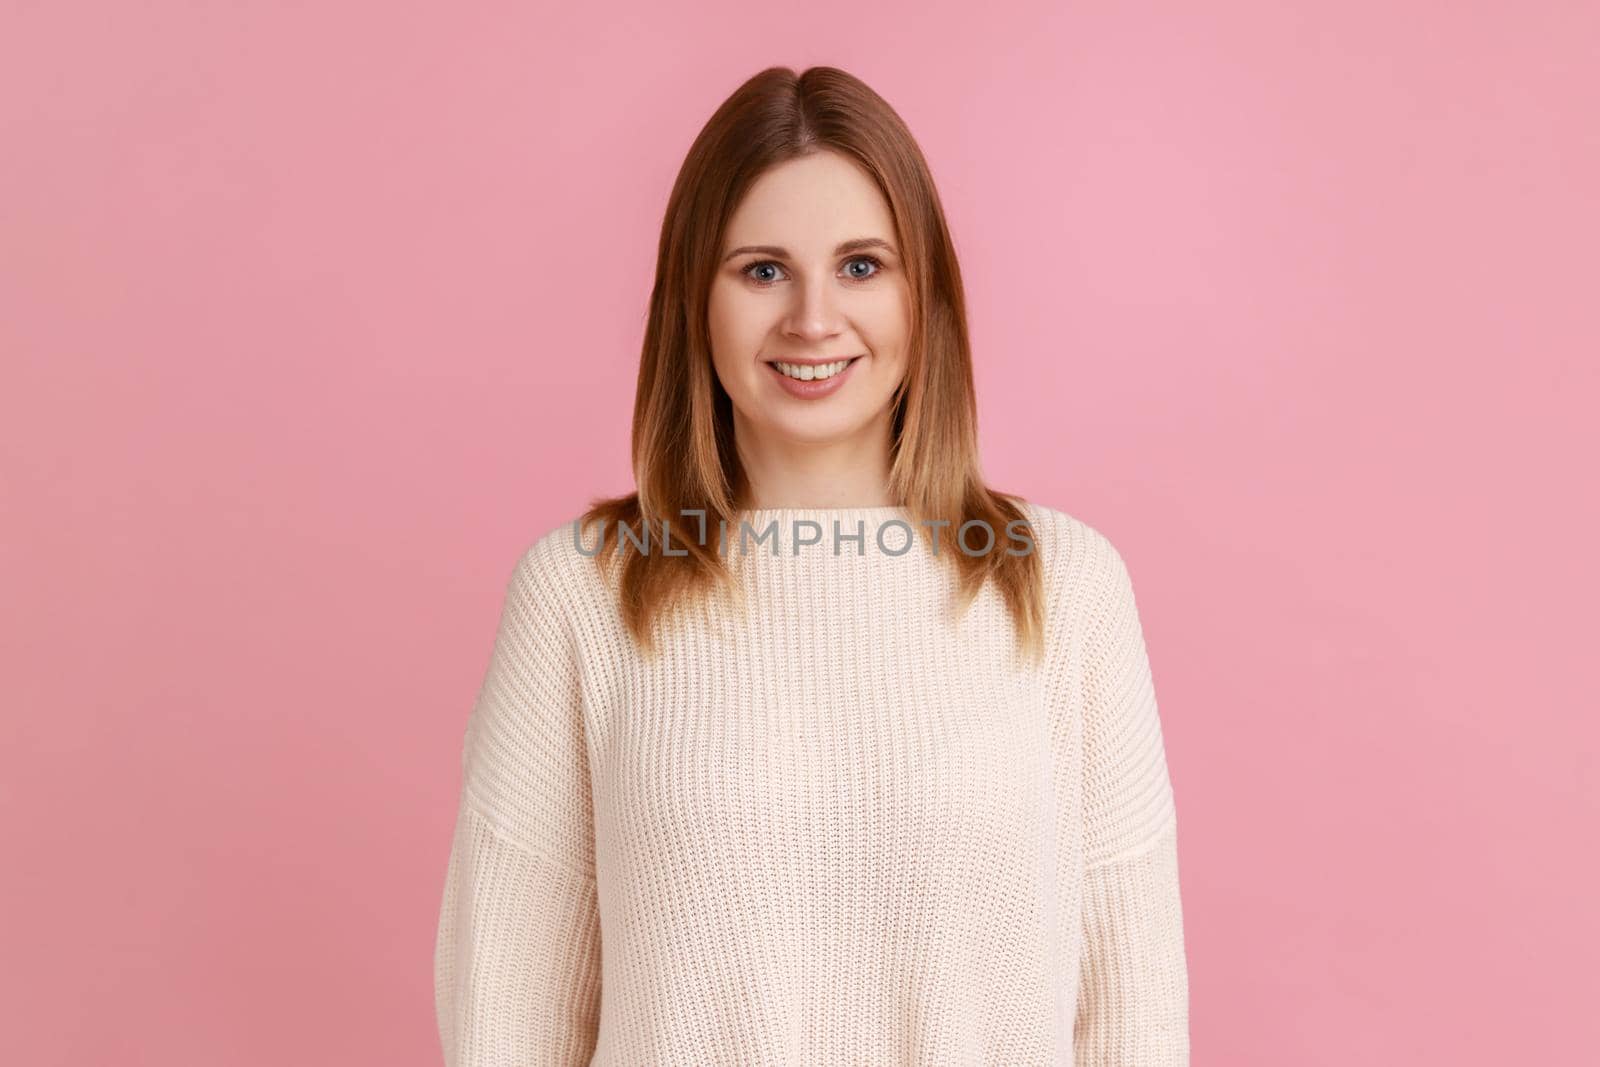 Portrait of positive successful blond woman standing with smile, looking happily at camera, expressing optimism, wearing white sweater. Indoor studio shot isolated on pink background.